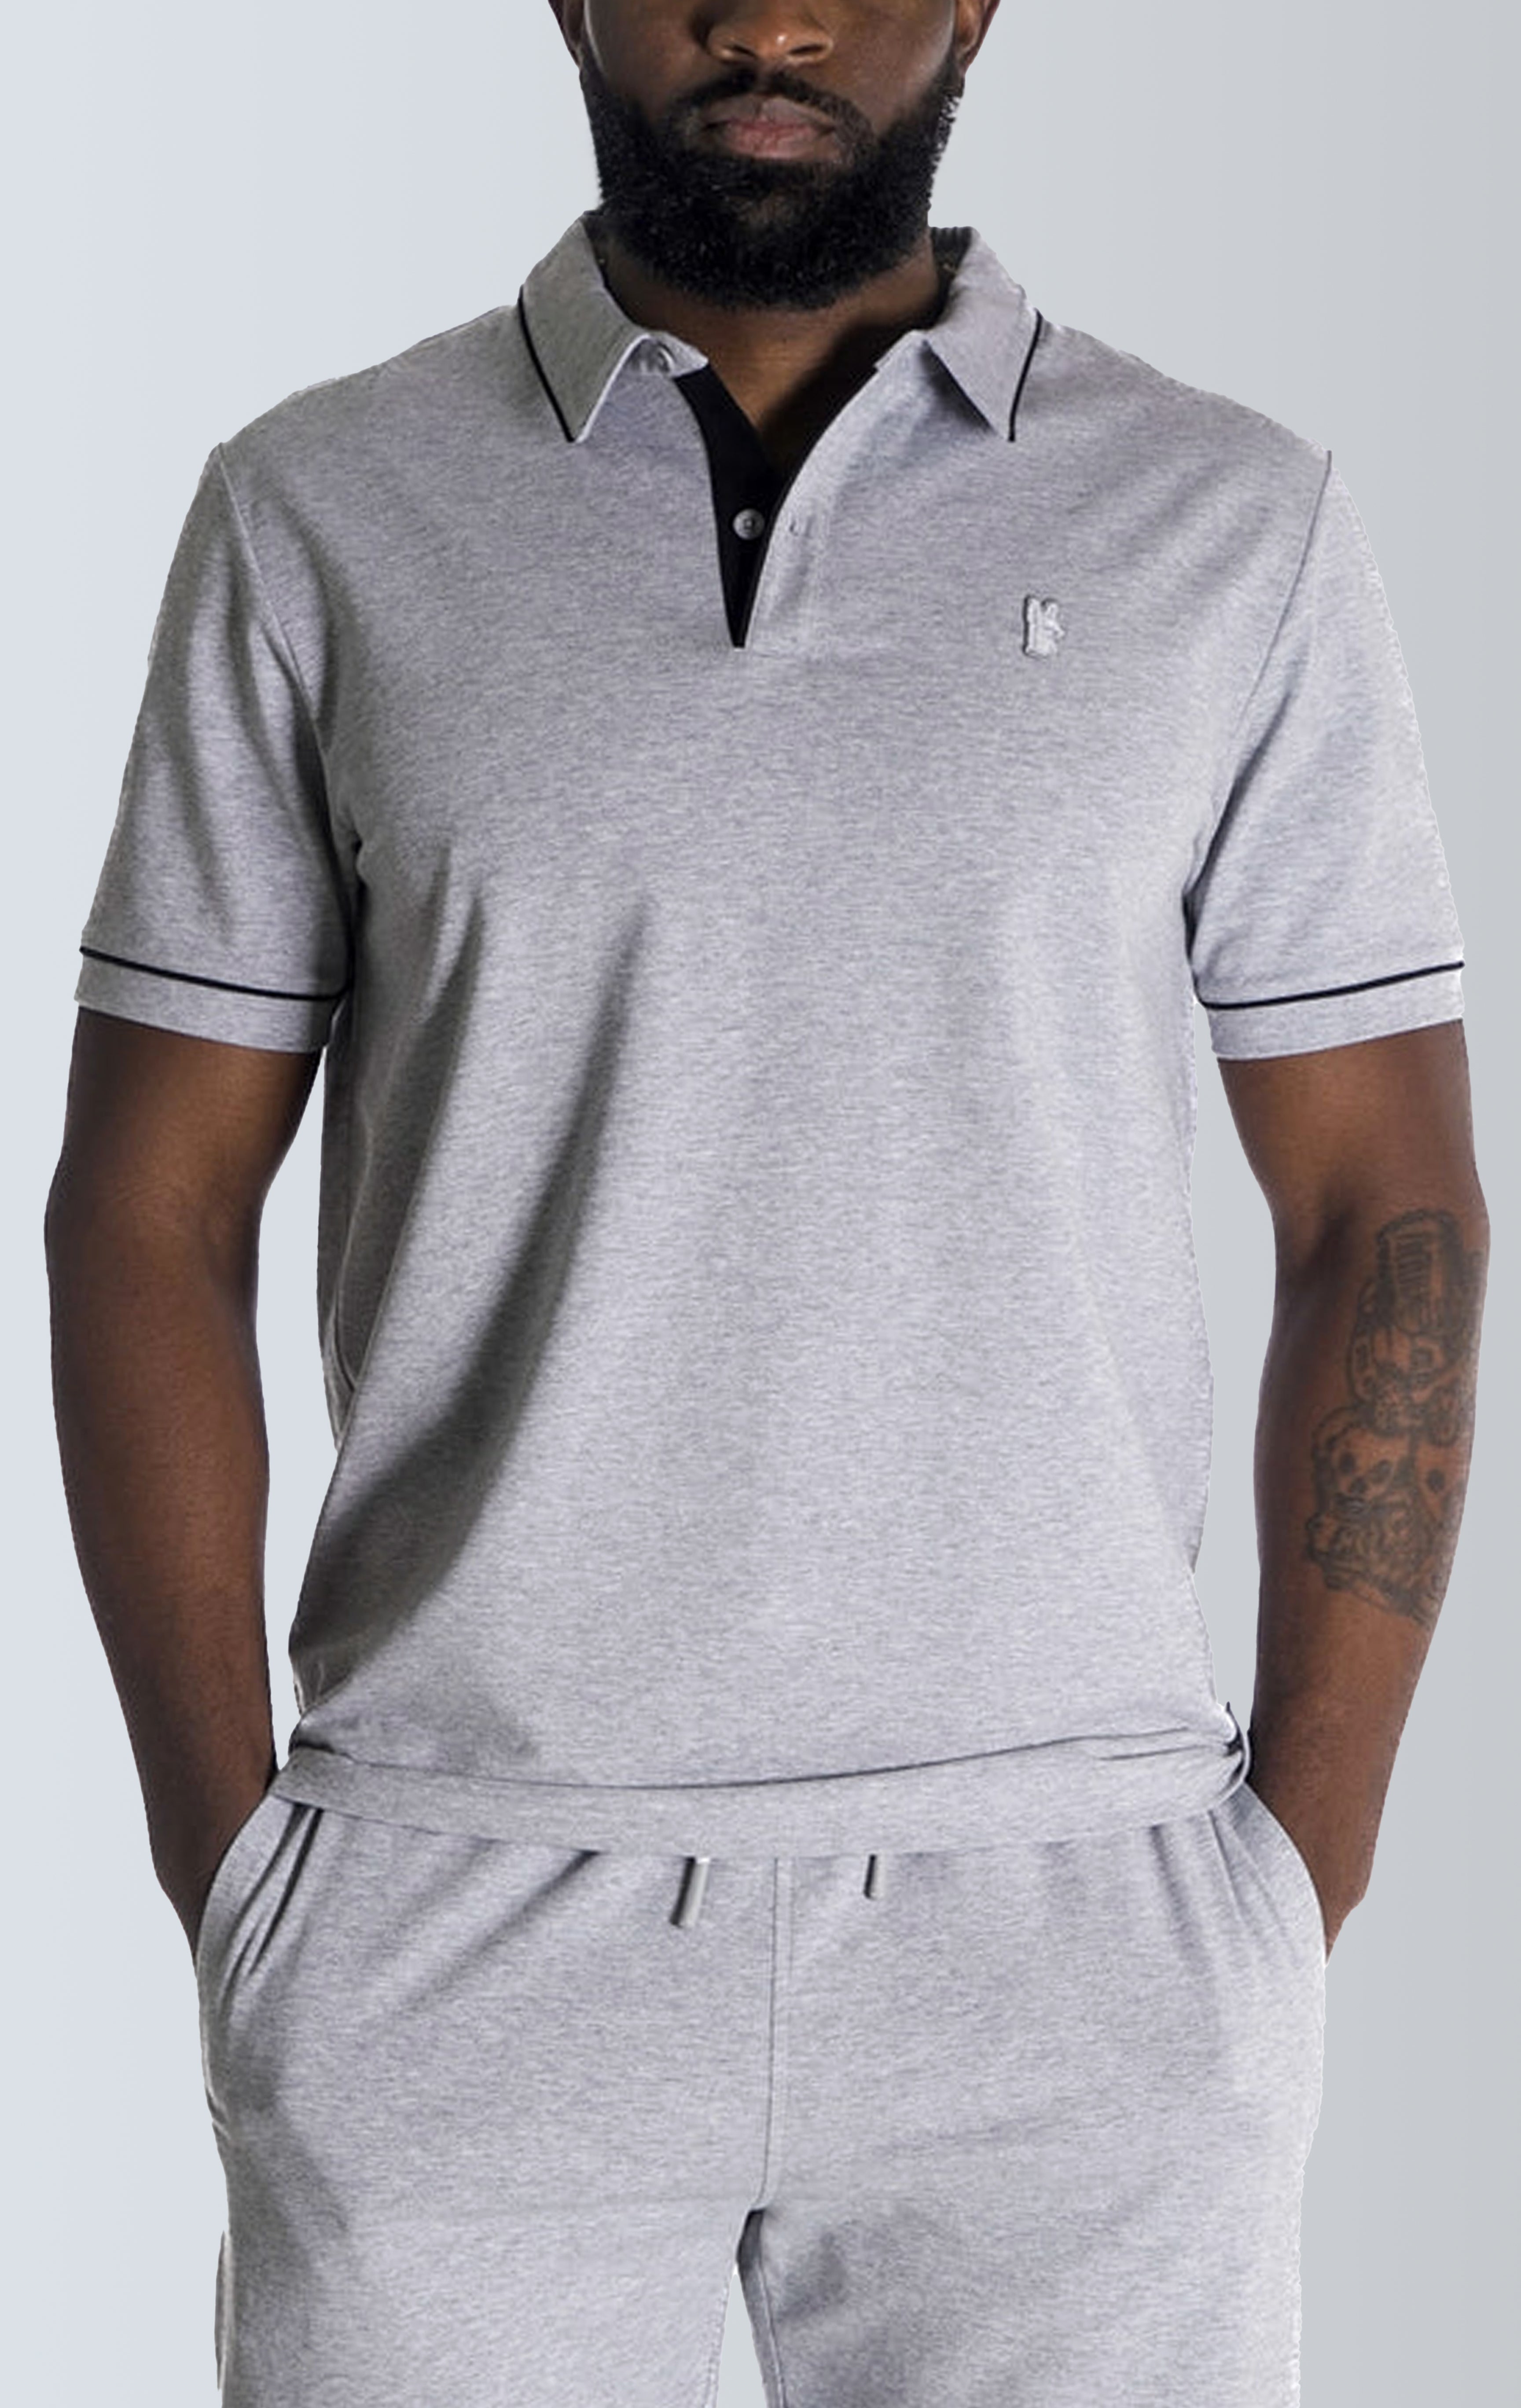 gray Luciano stretch premium jersey polo shirt with collared detailing, short-sleeved composition, three button front fastening. MAKOBI custom made design